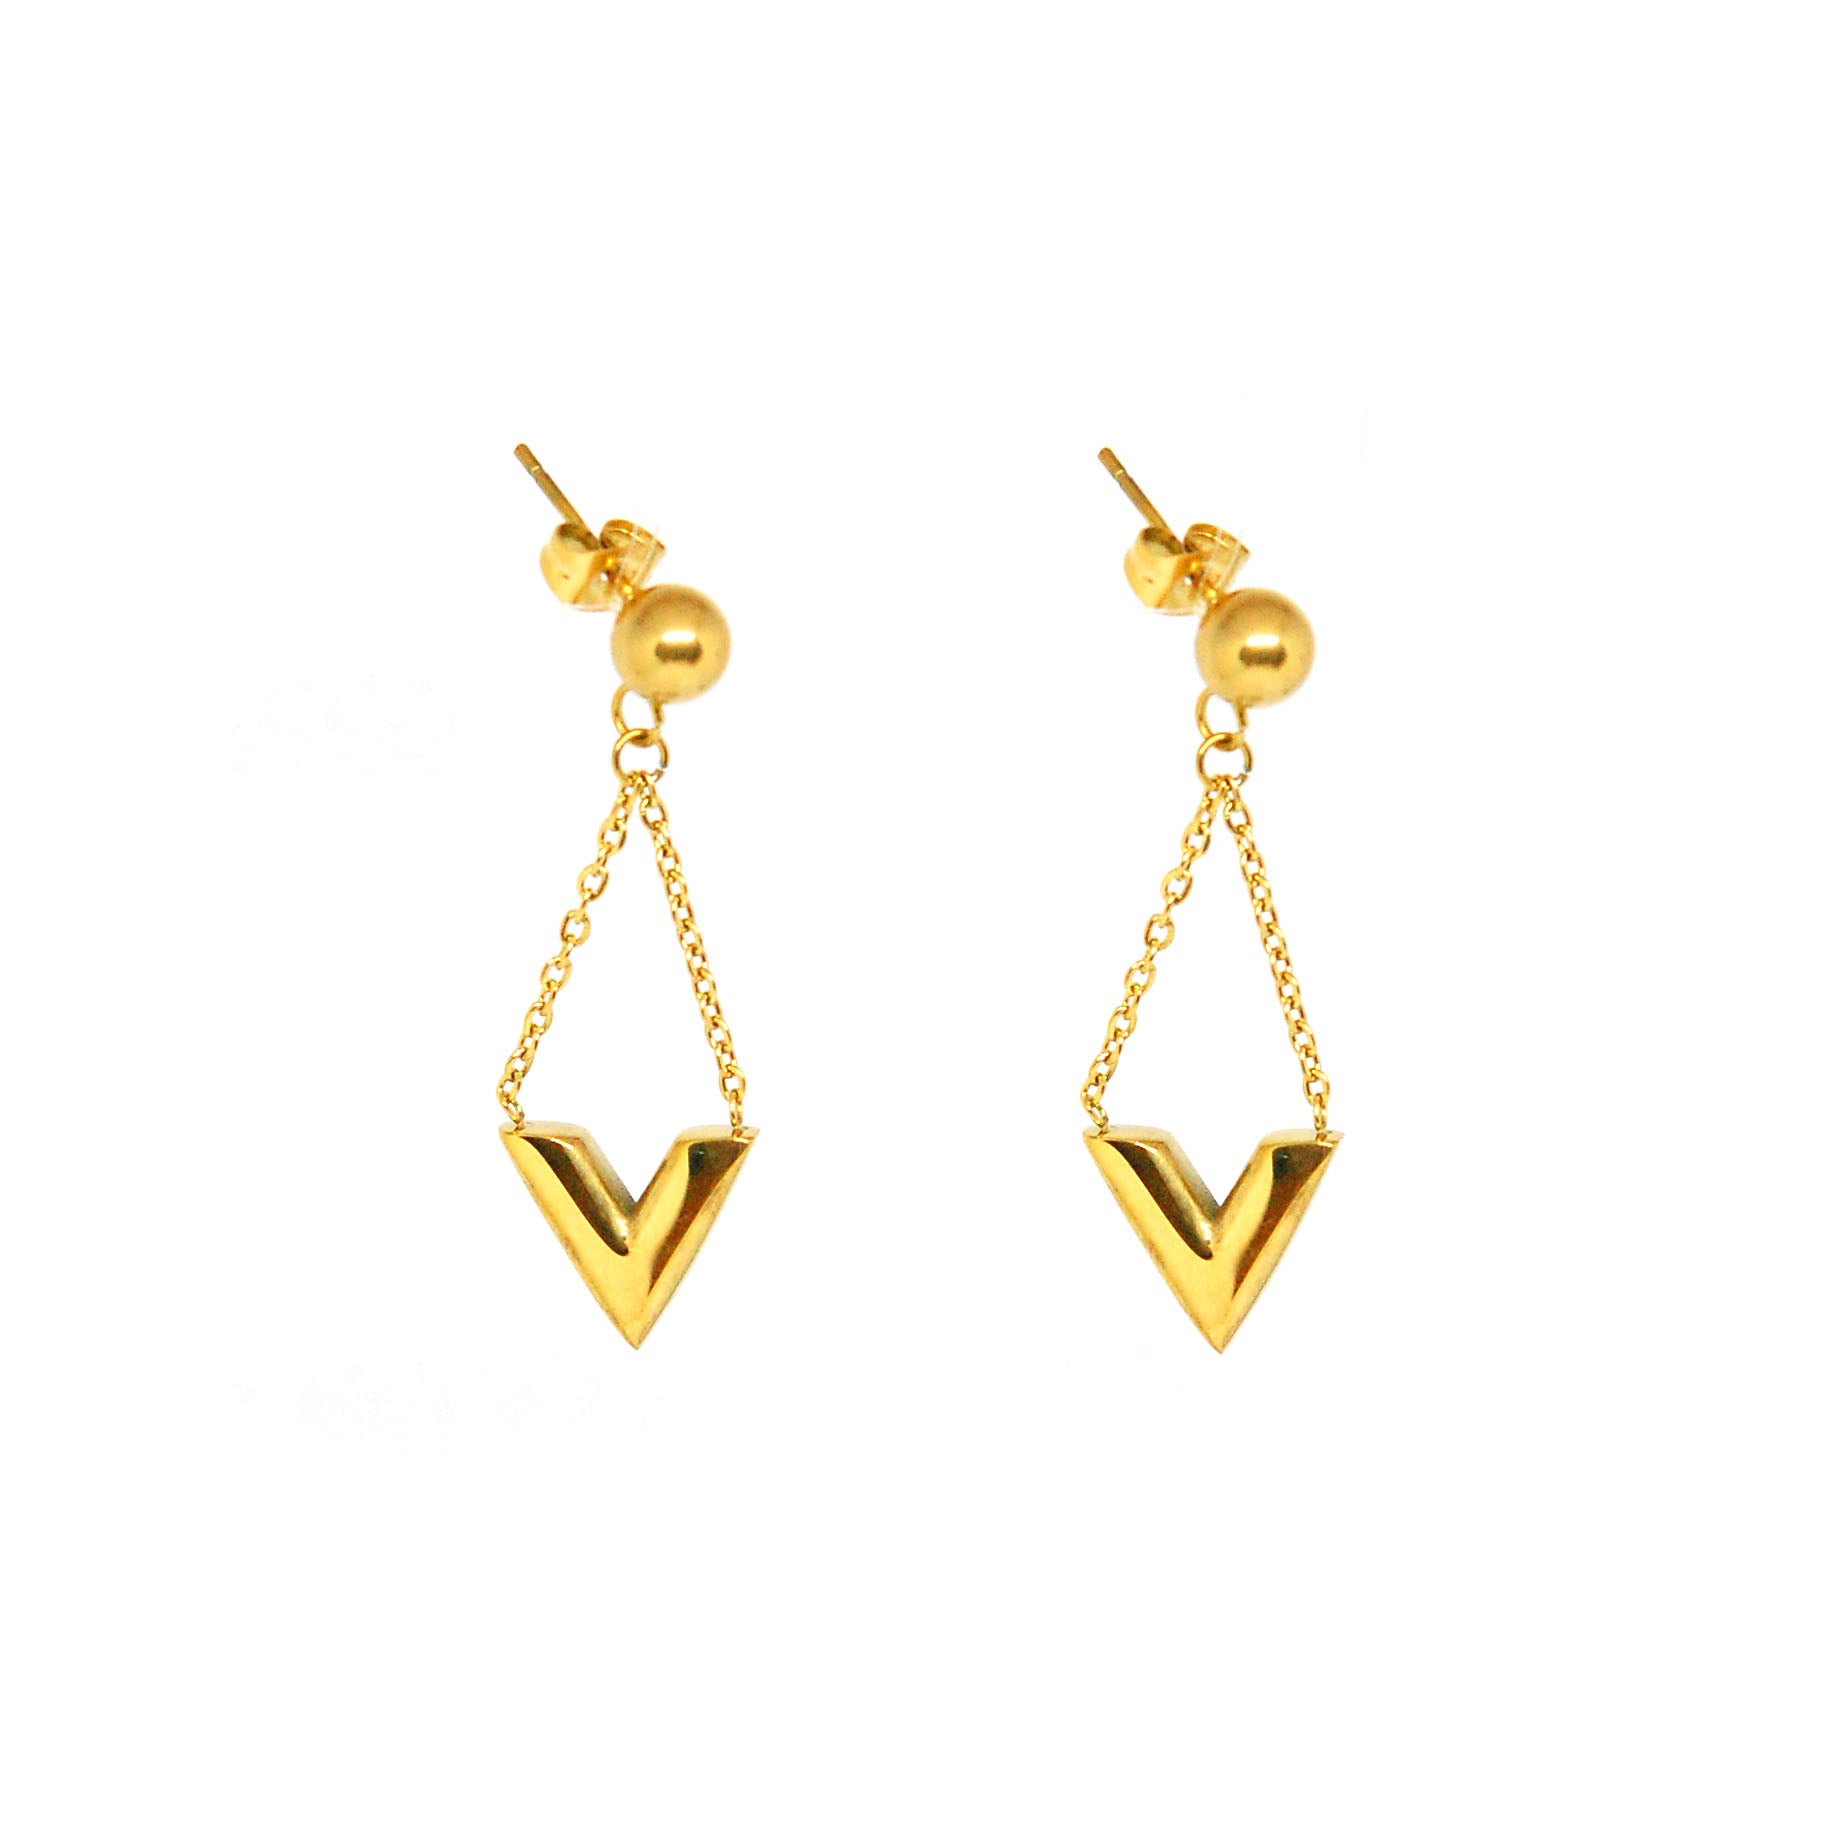 ESE 7694: All IPG Balls & Dangling V-Accent Earrings